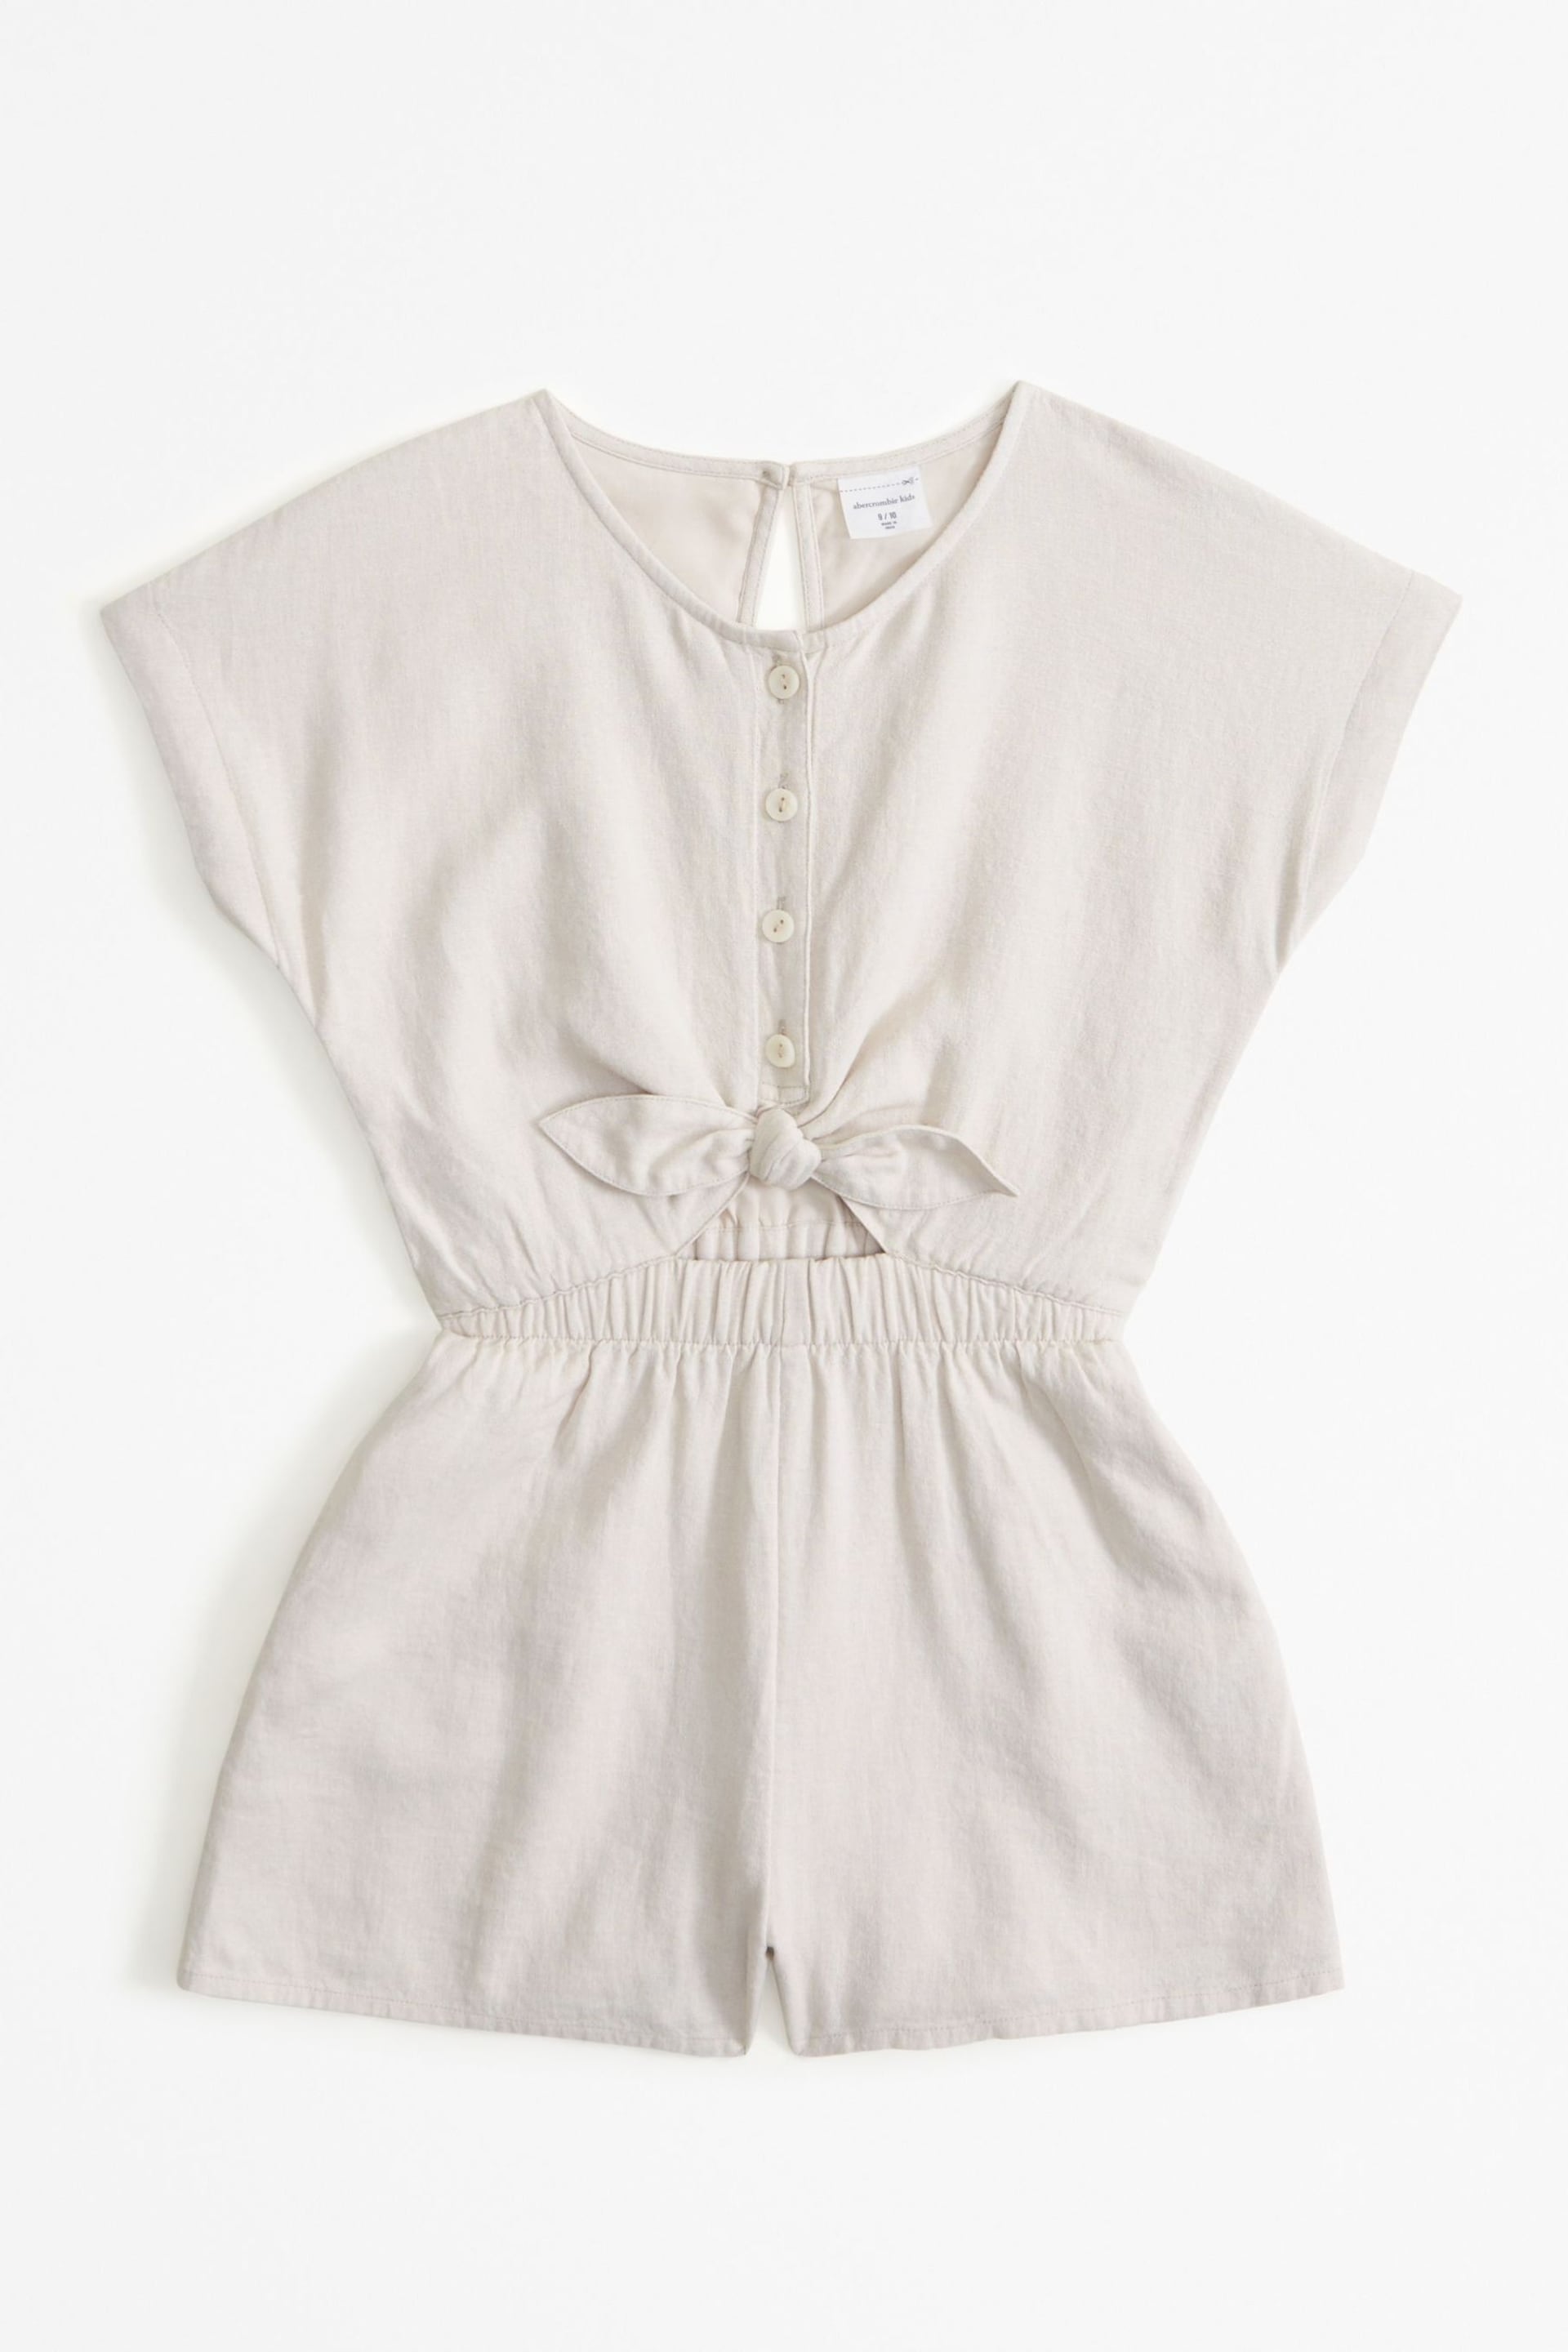 Abercrombie & Fitch Cream Tie Front Short Sleeve Linen Playsuit - Image 1 of 1